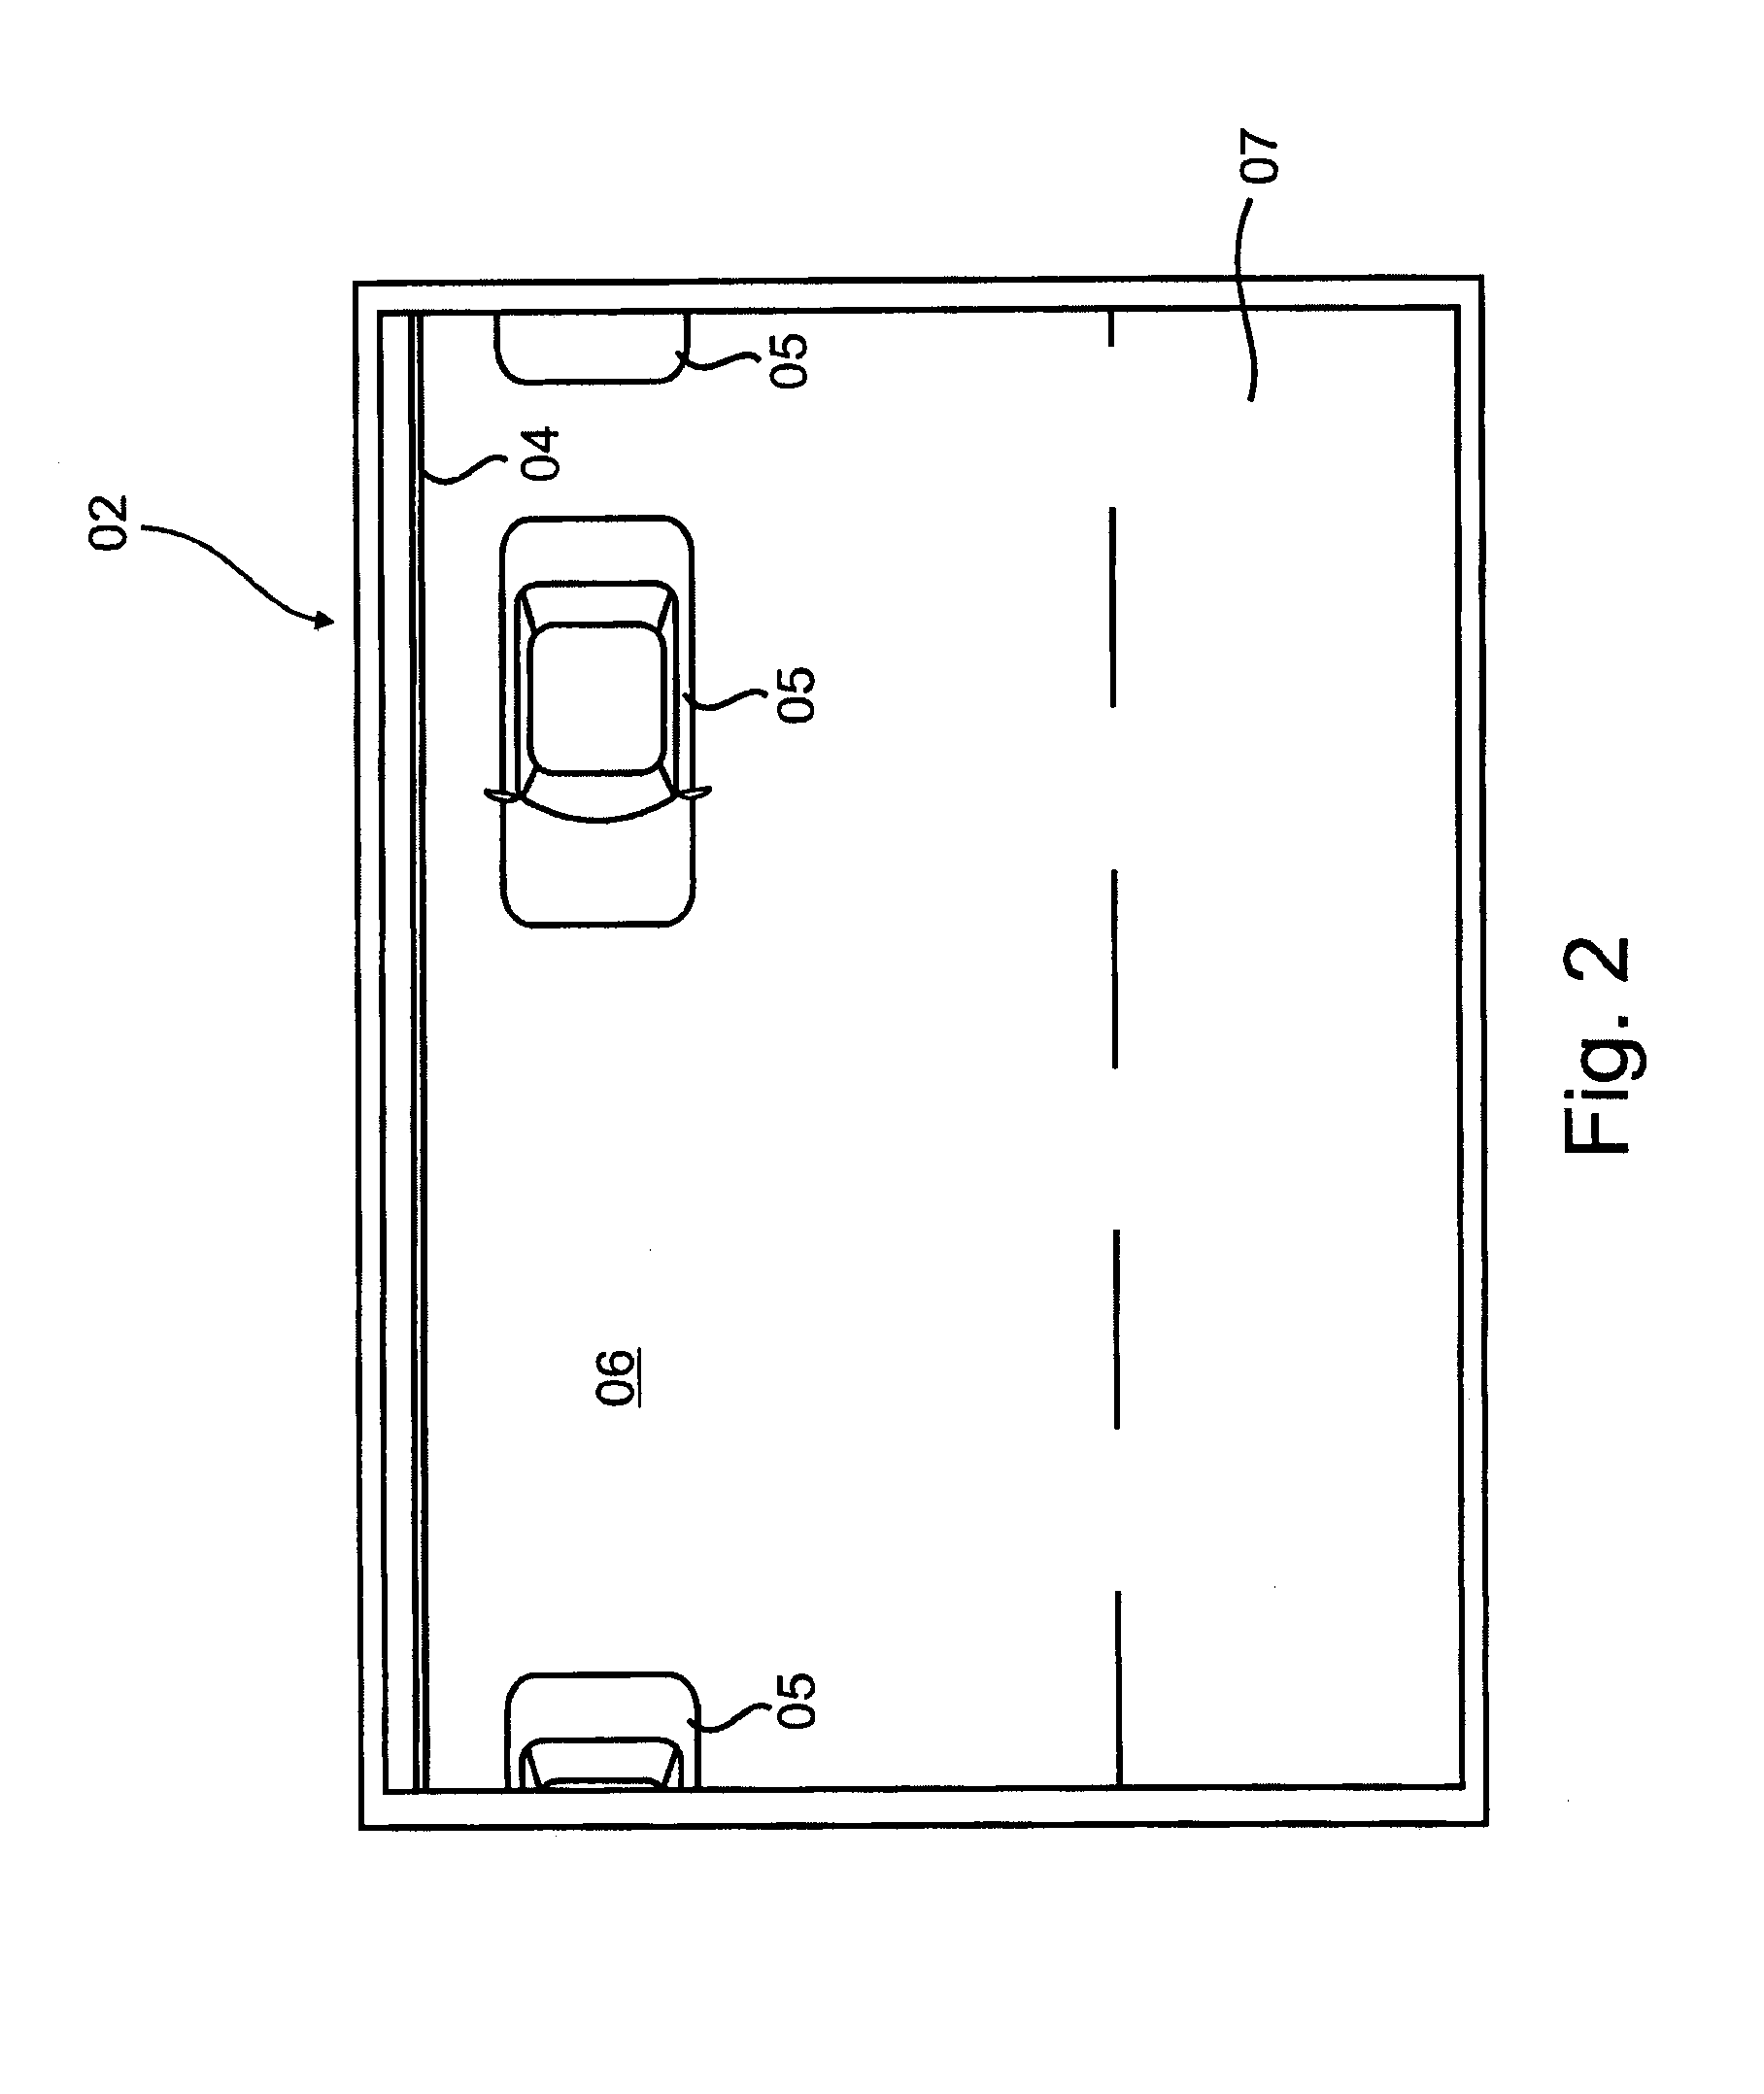 Method of operating a display system in a vehicle for finding a parking place